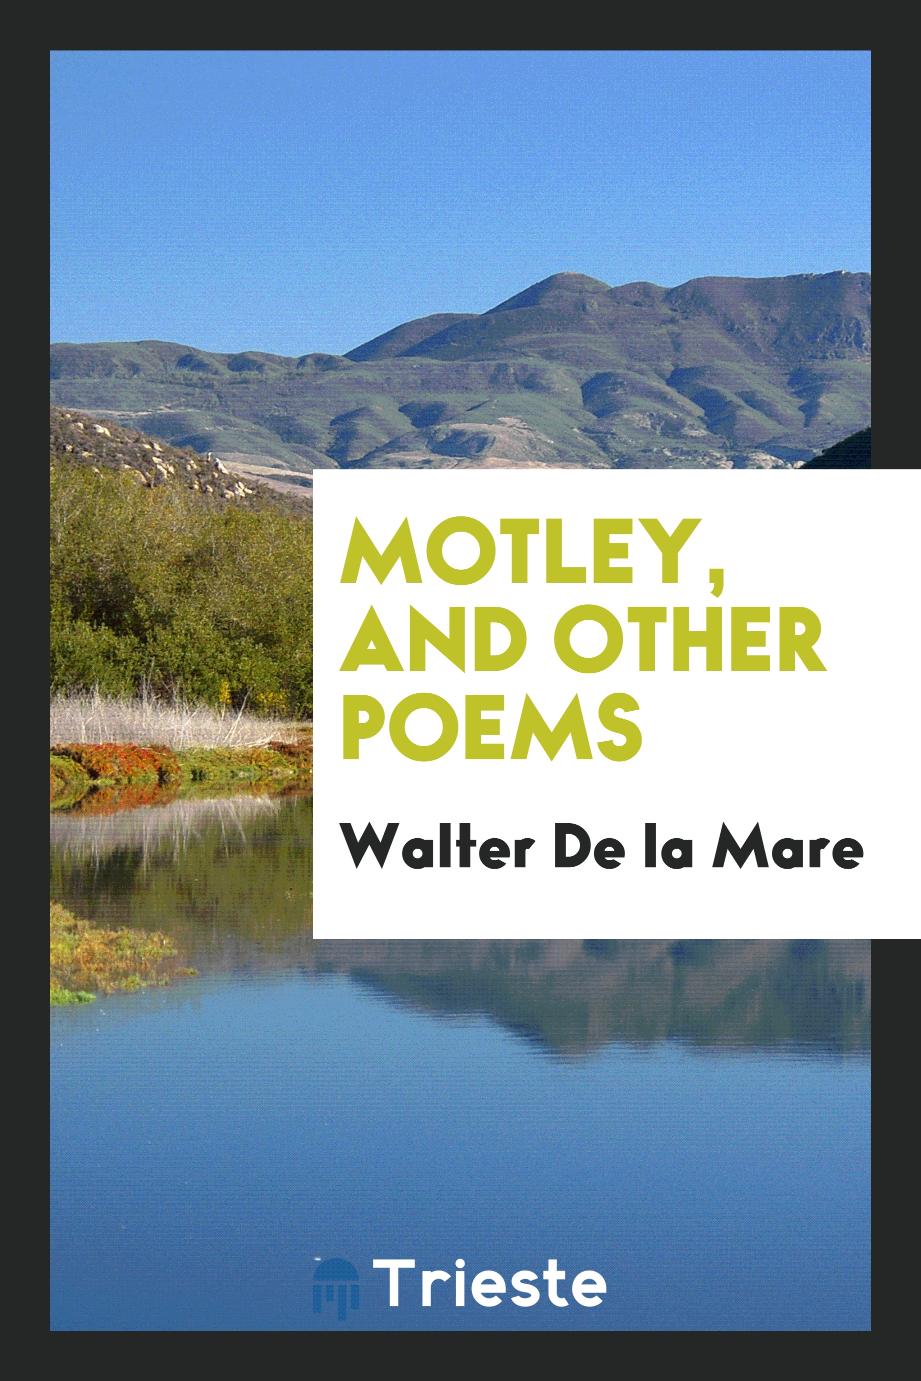 Motley, and other poems